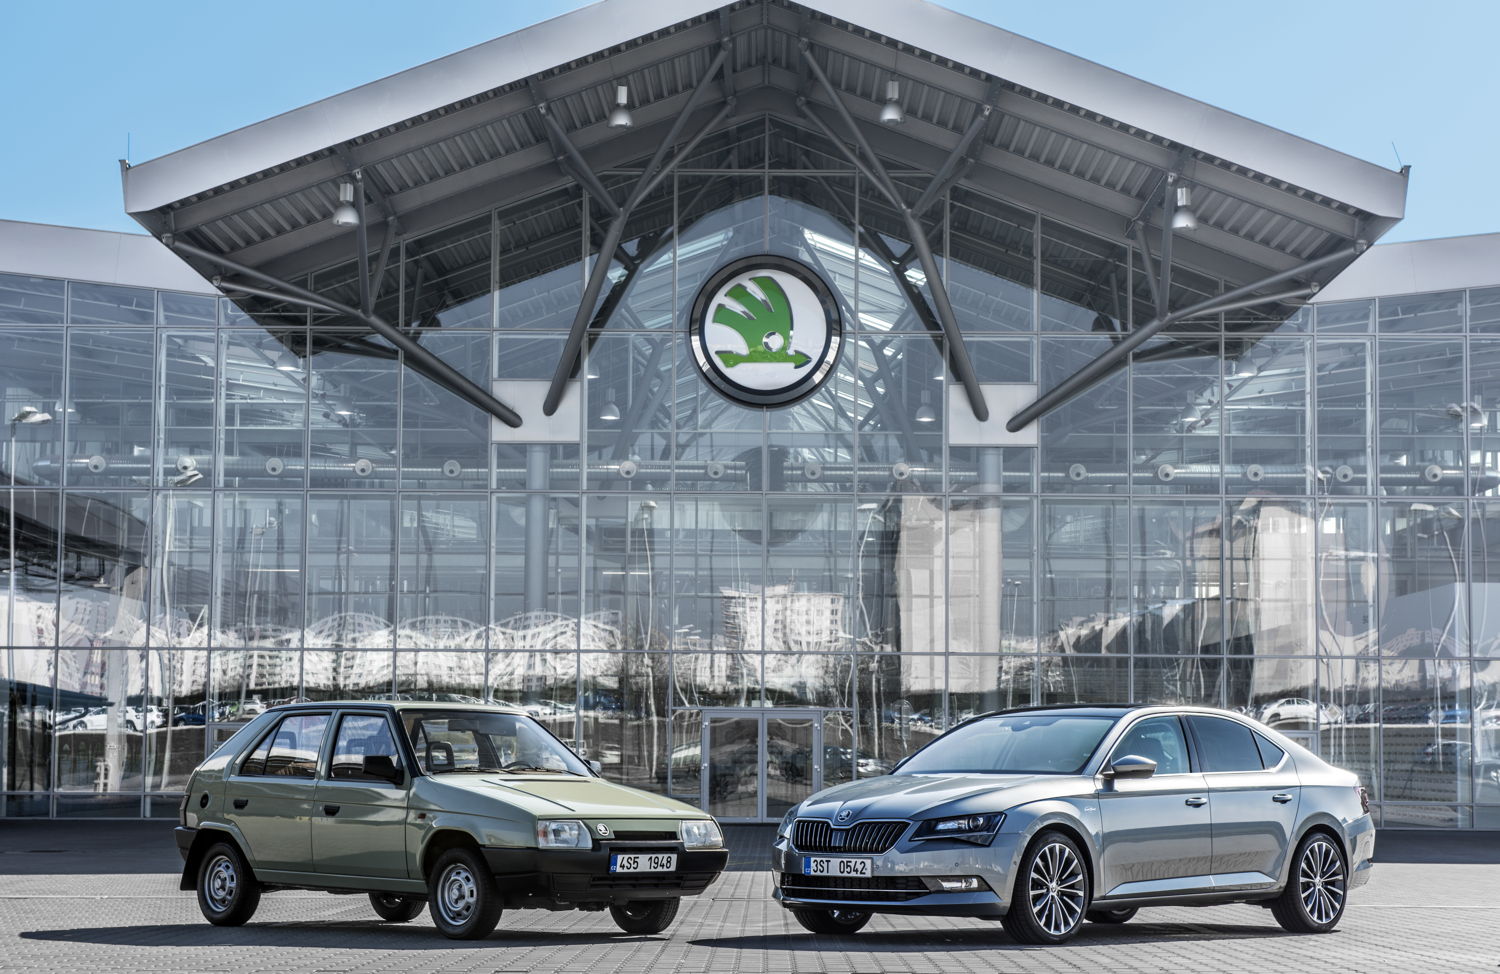 The most important model in 1991 was the ŠKODA Favorit; for its time, it was a modern and spacious compact car with hatchback. A quarter of a century later, the sophisticated mid-class segment model, the ŠKODA Superb, is the brand’s flagship.